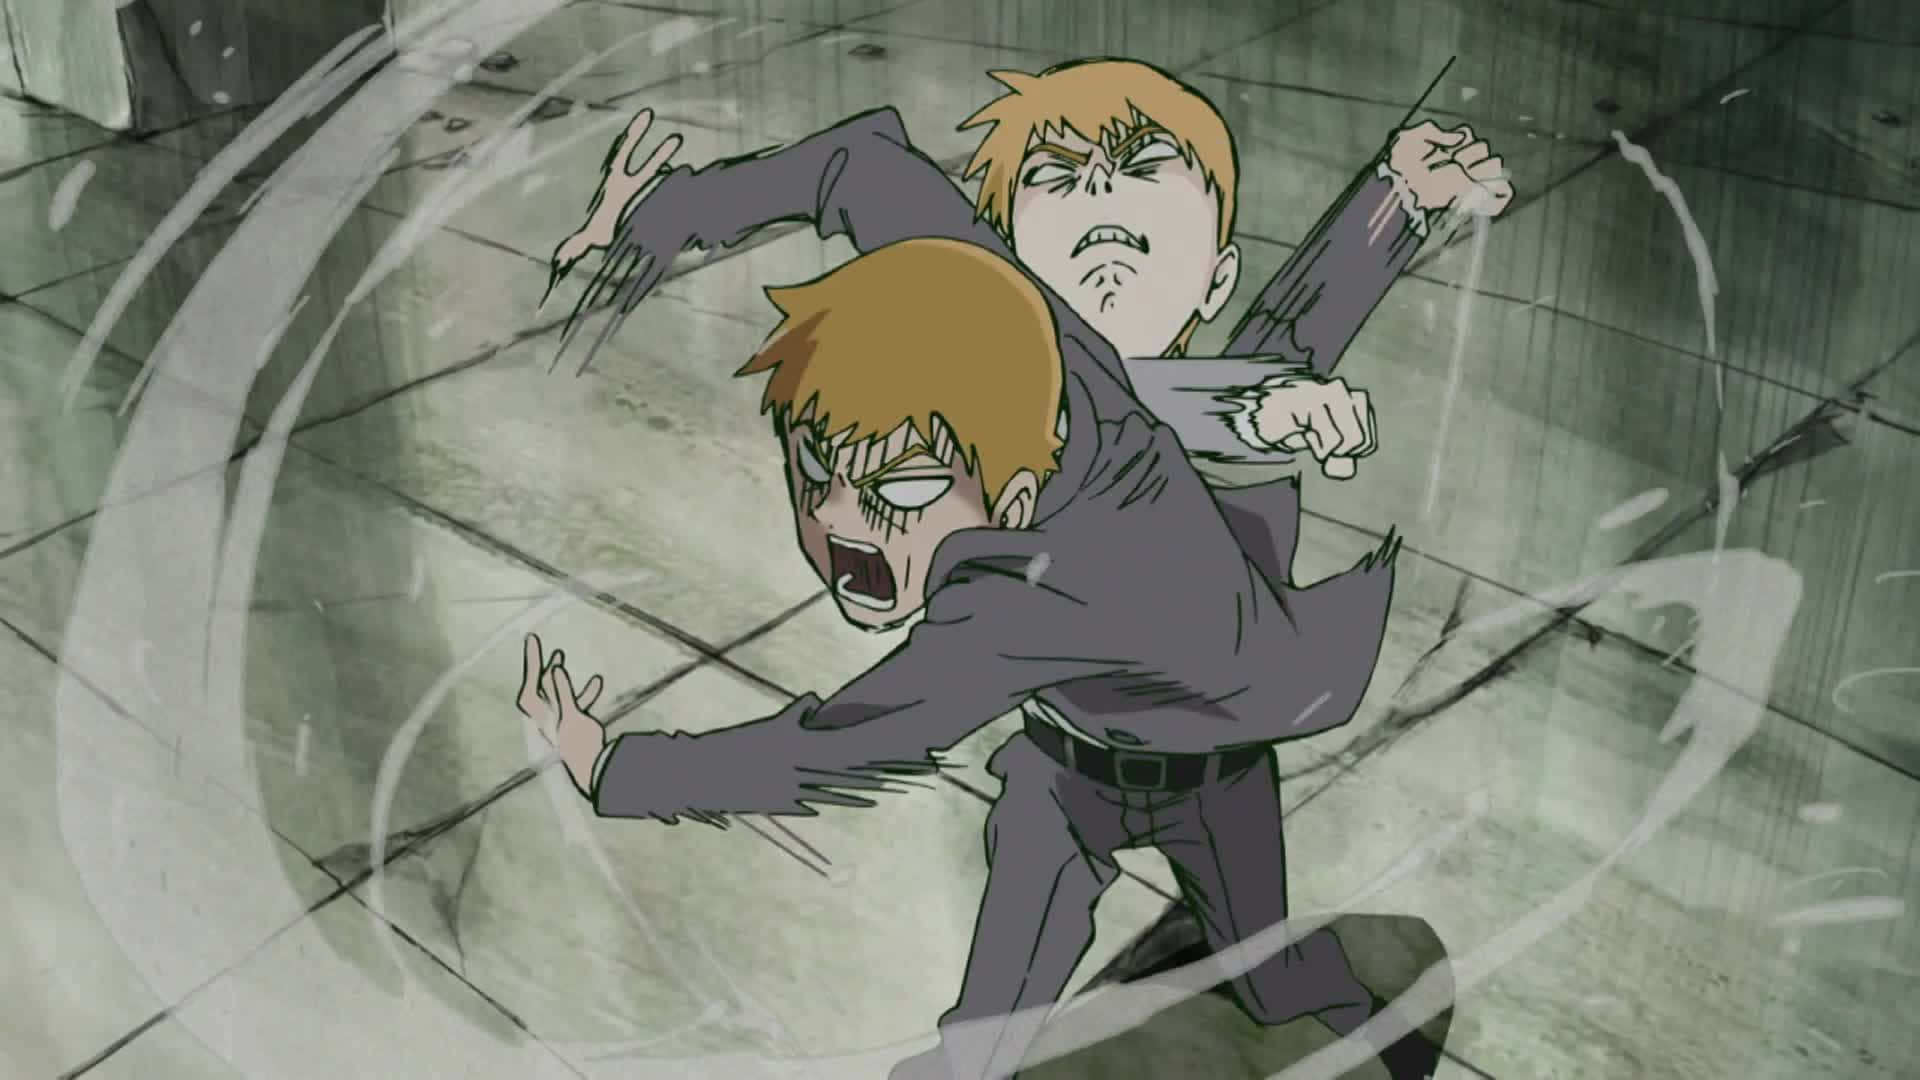 Harnessing His Psychic Abilities, Shigeo Kageyama A.K.A. Mob Unleashes His Powers.